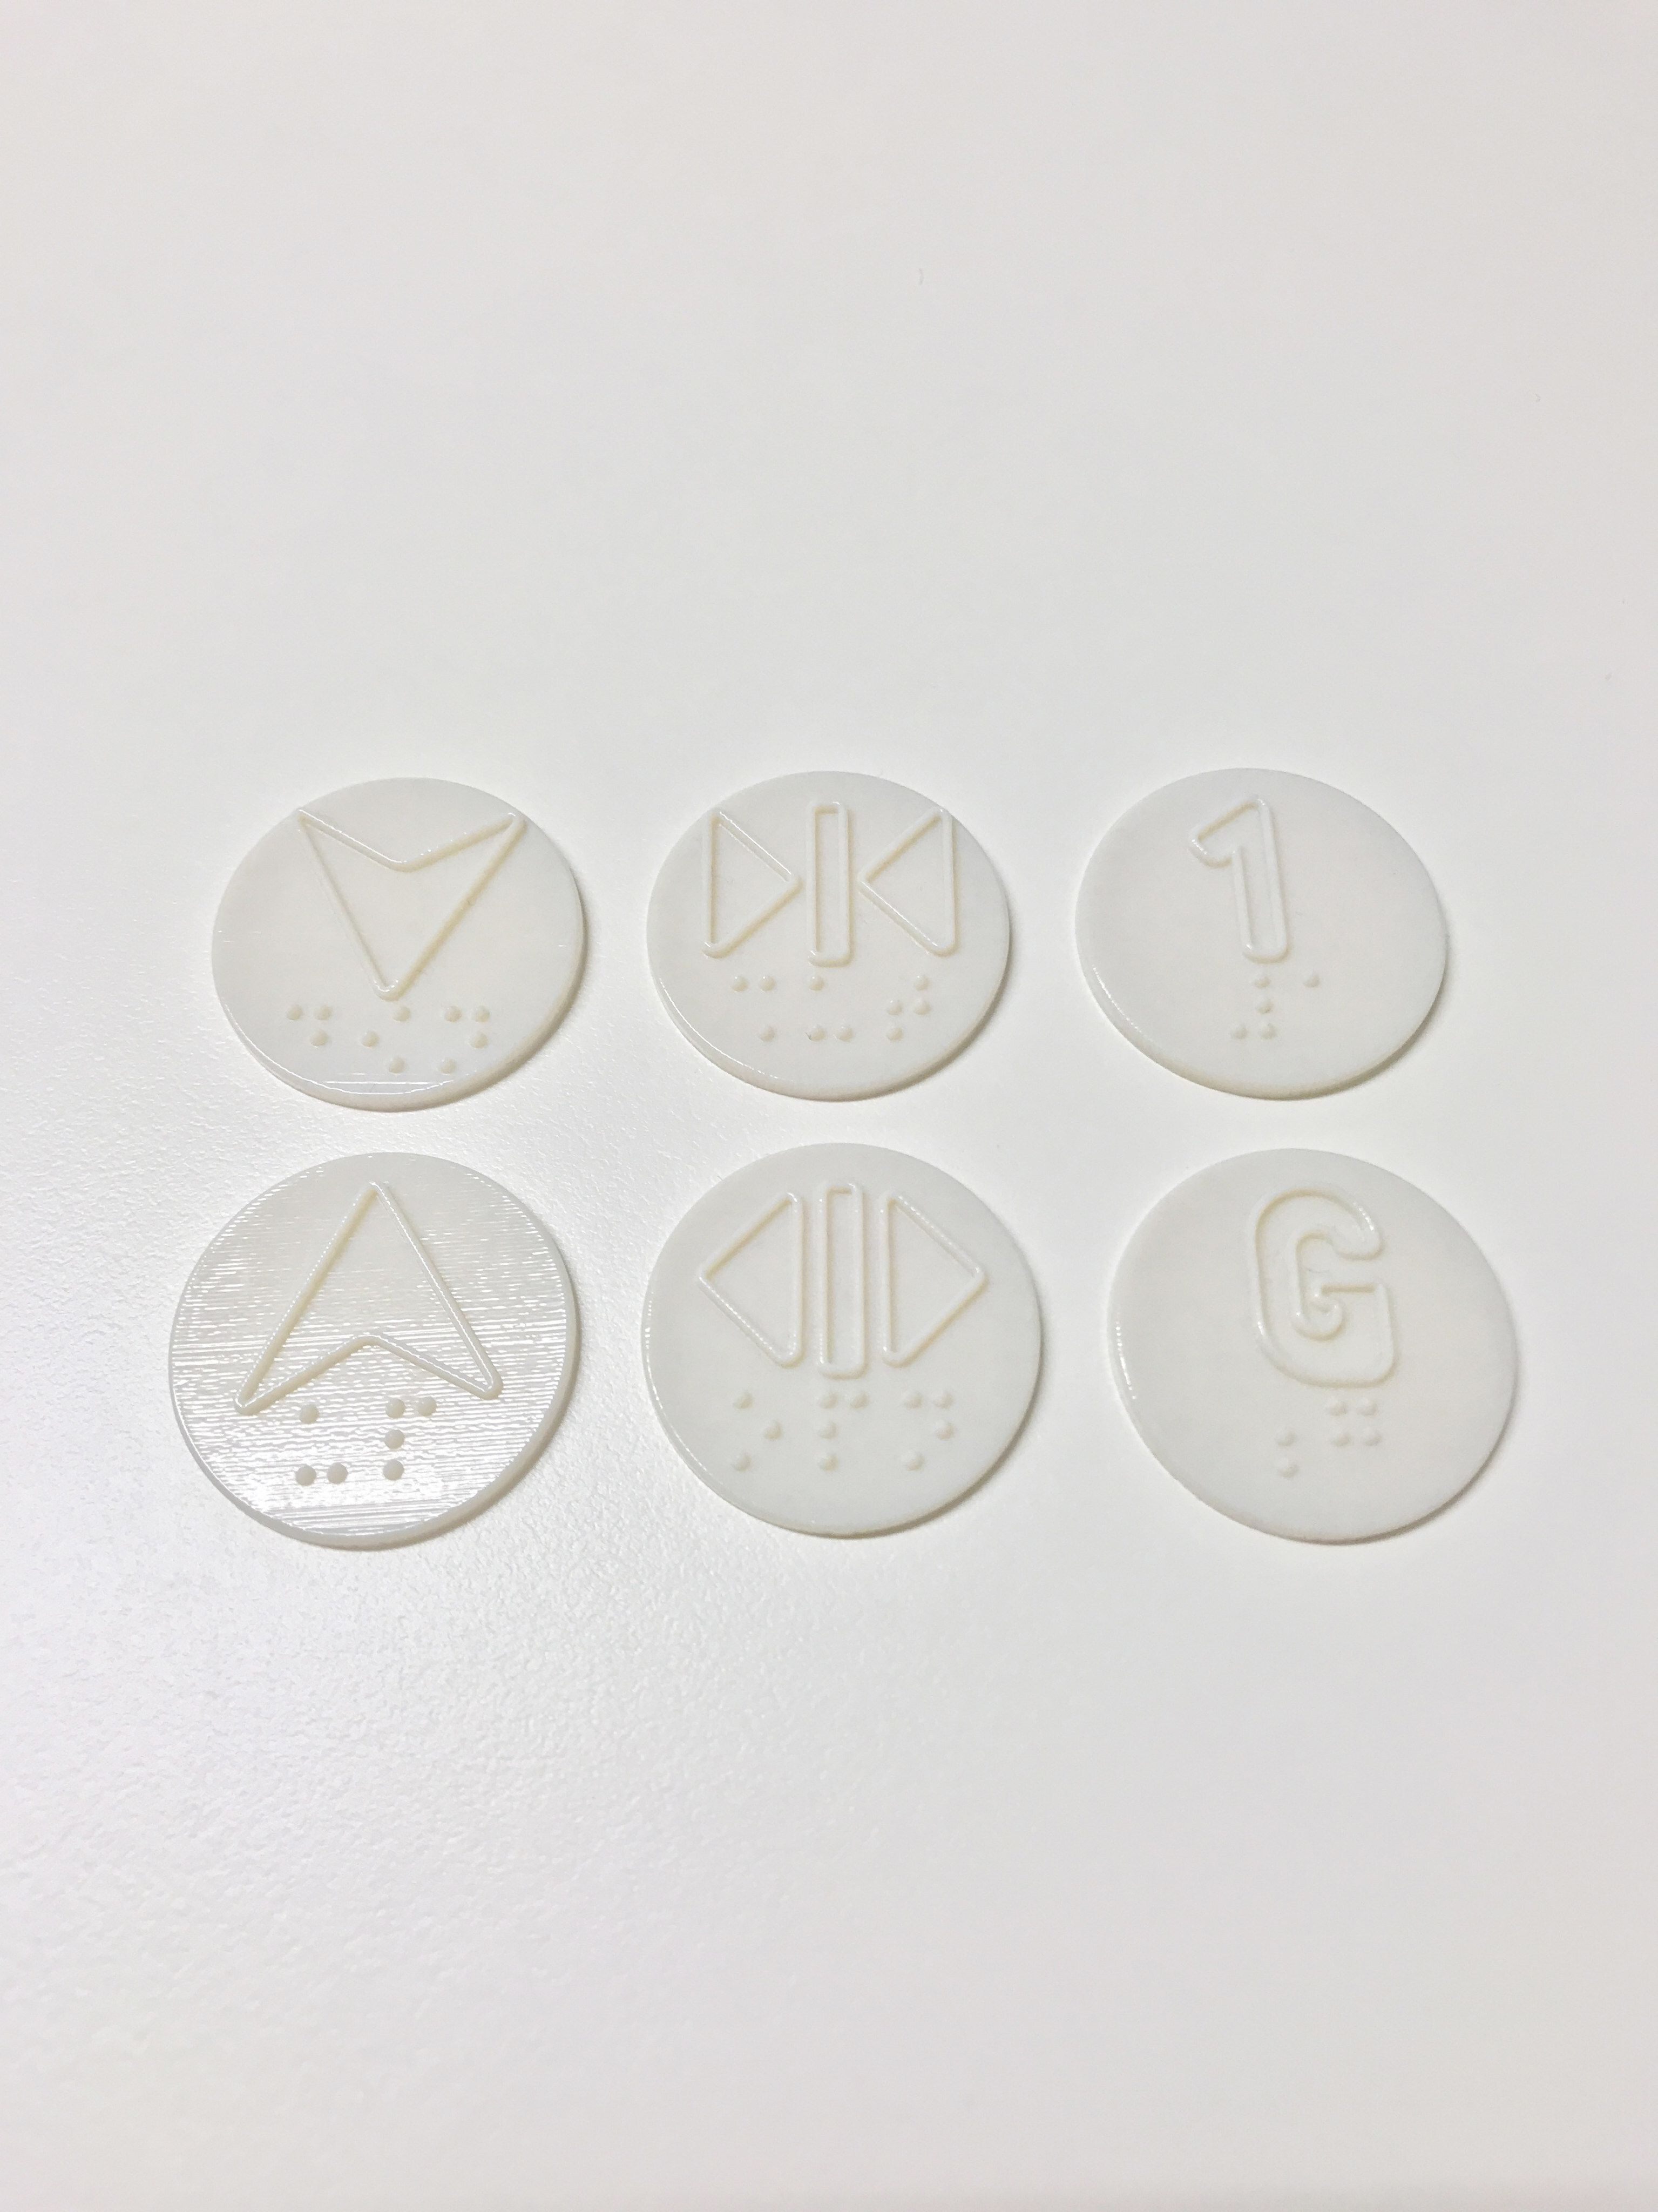 3D printed lift buttons created using the newly developed antivirus material from Hong Kong Polytechnic University. Photo: Handout